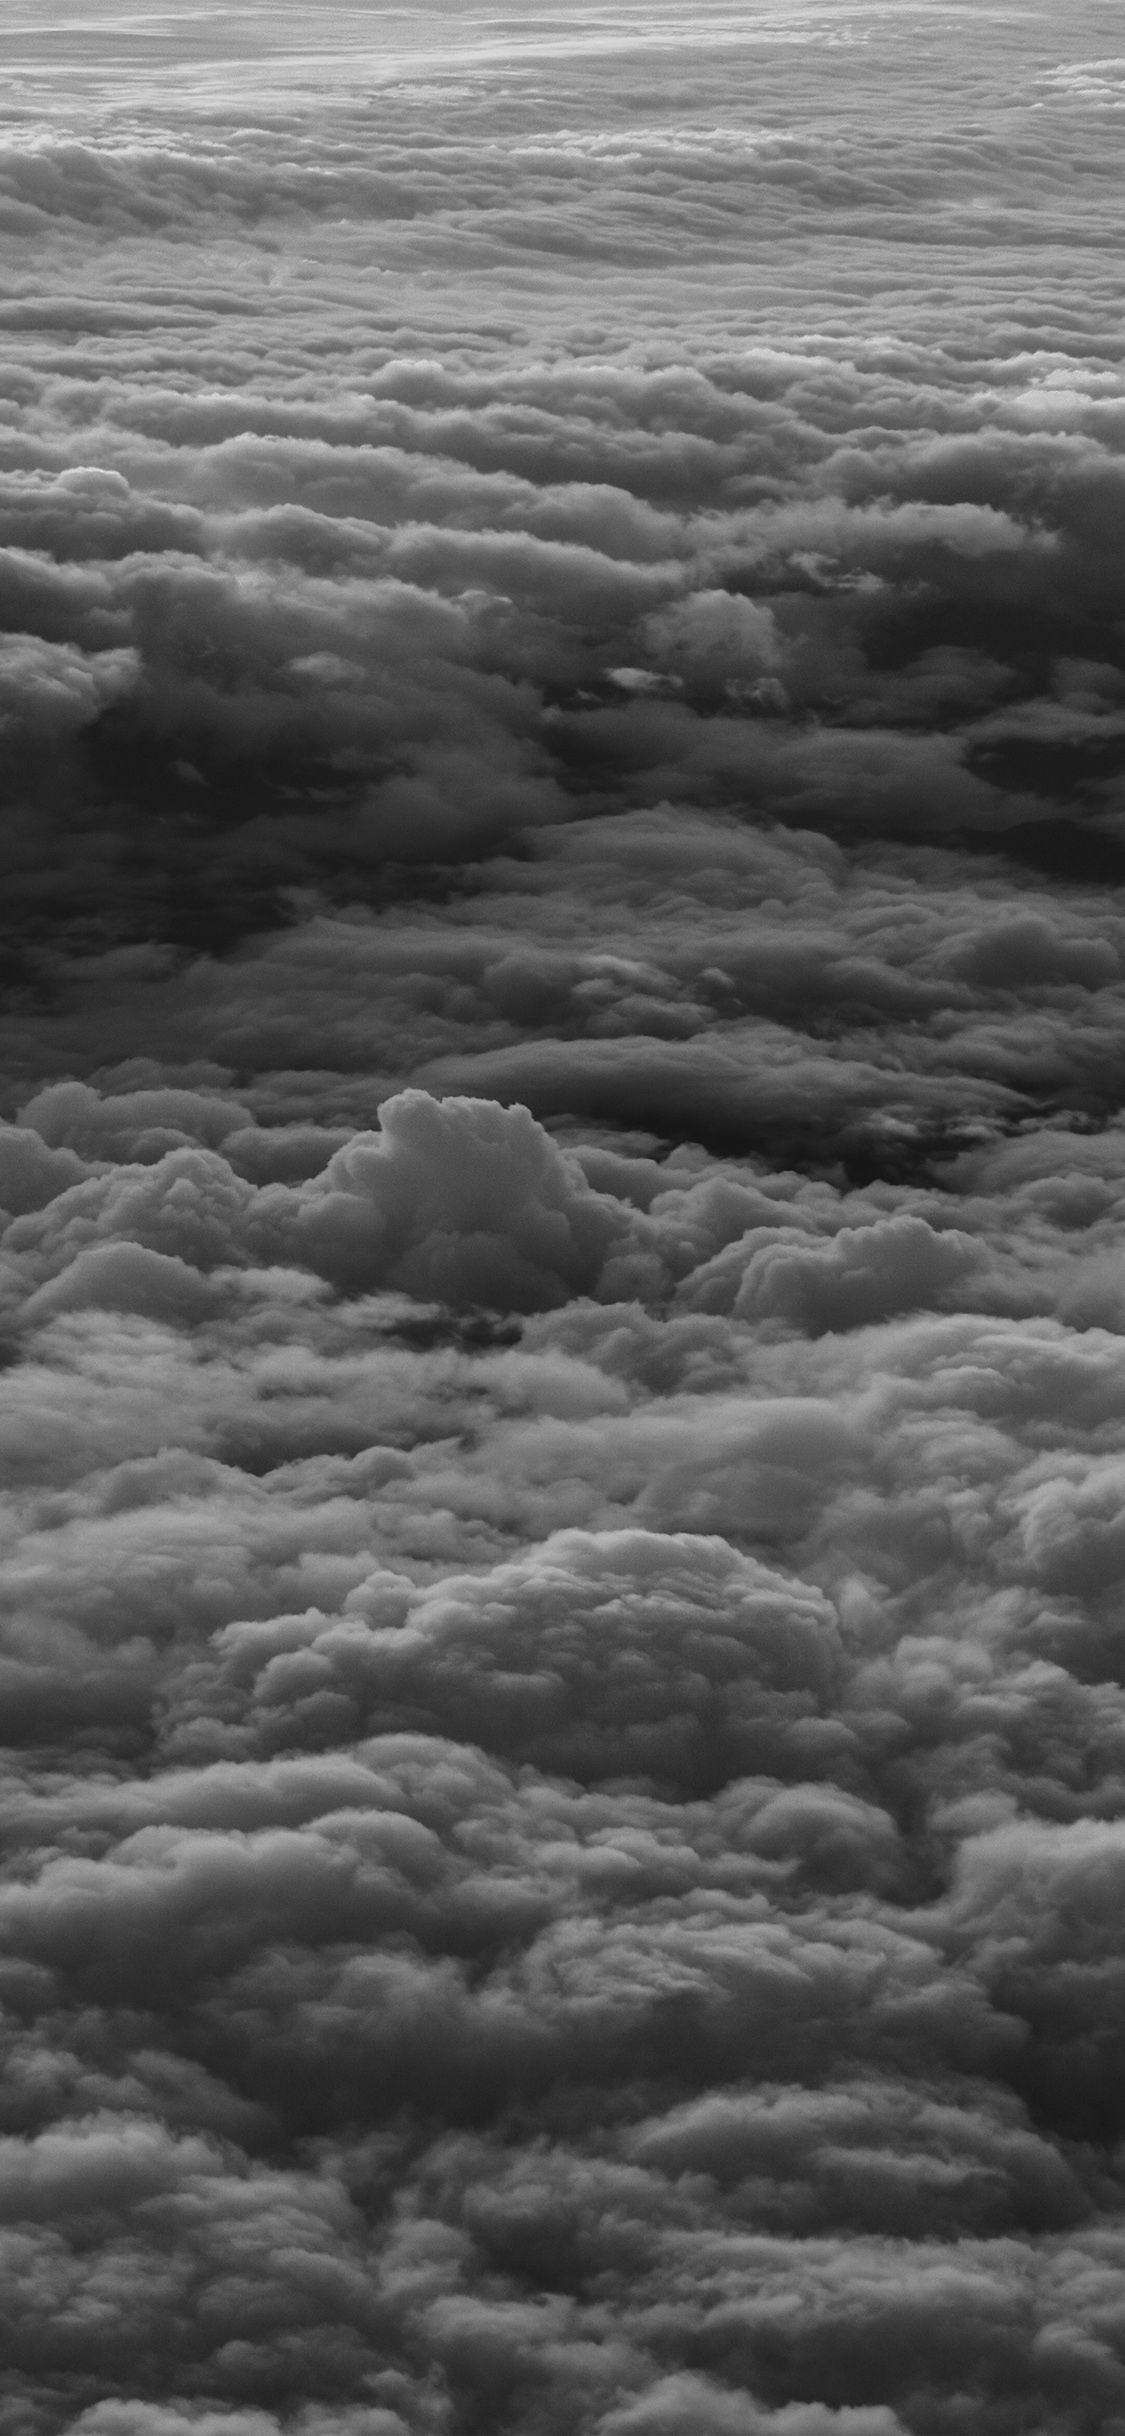 Black and white photo of clouds from an airplane - Earth